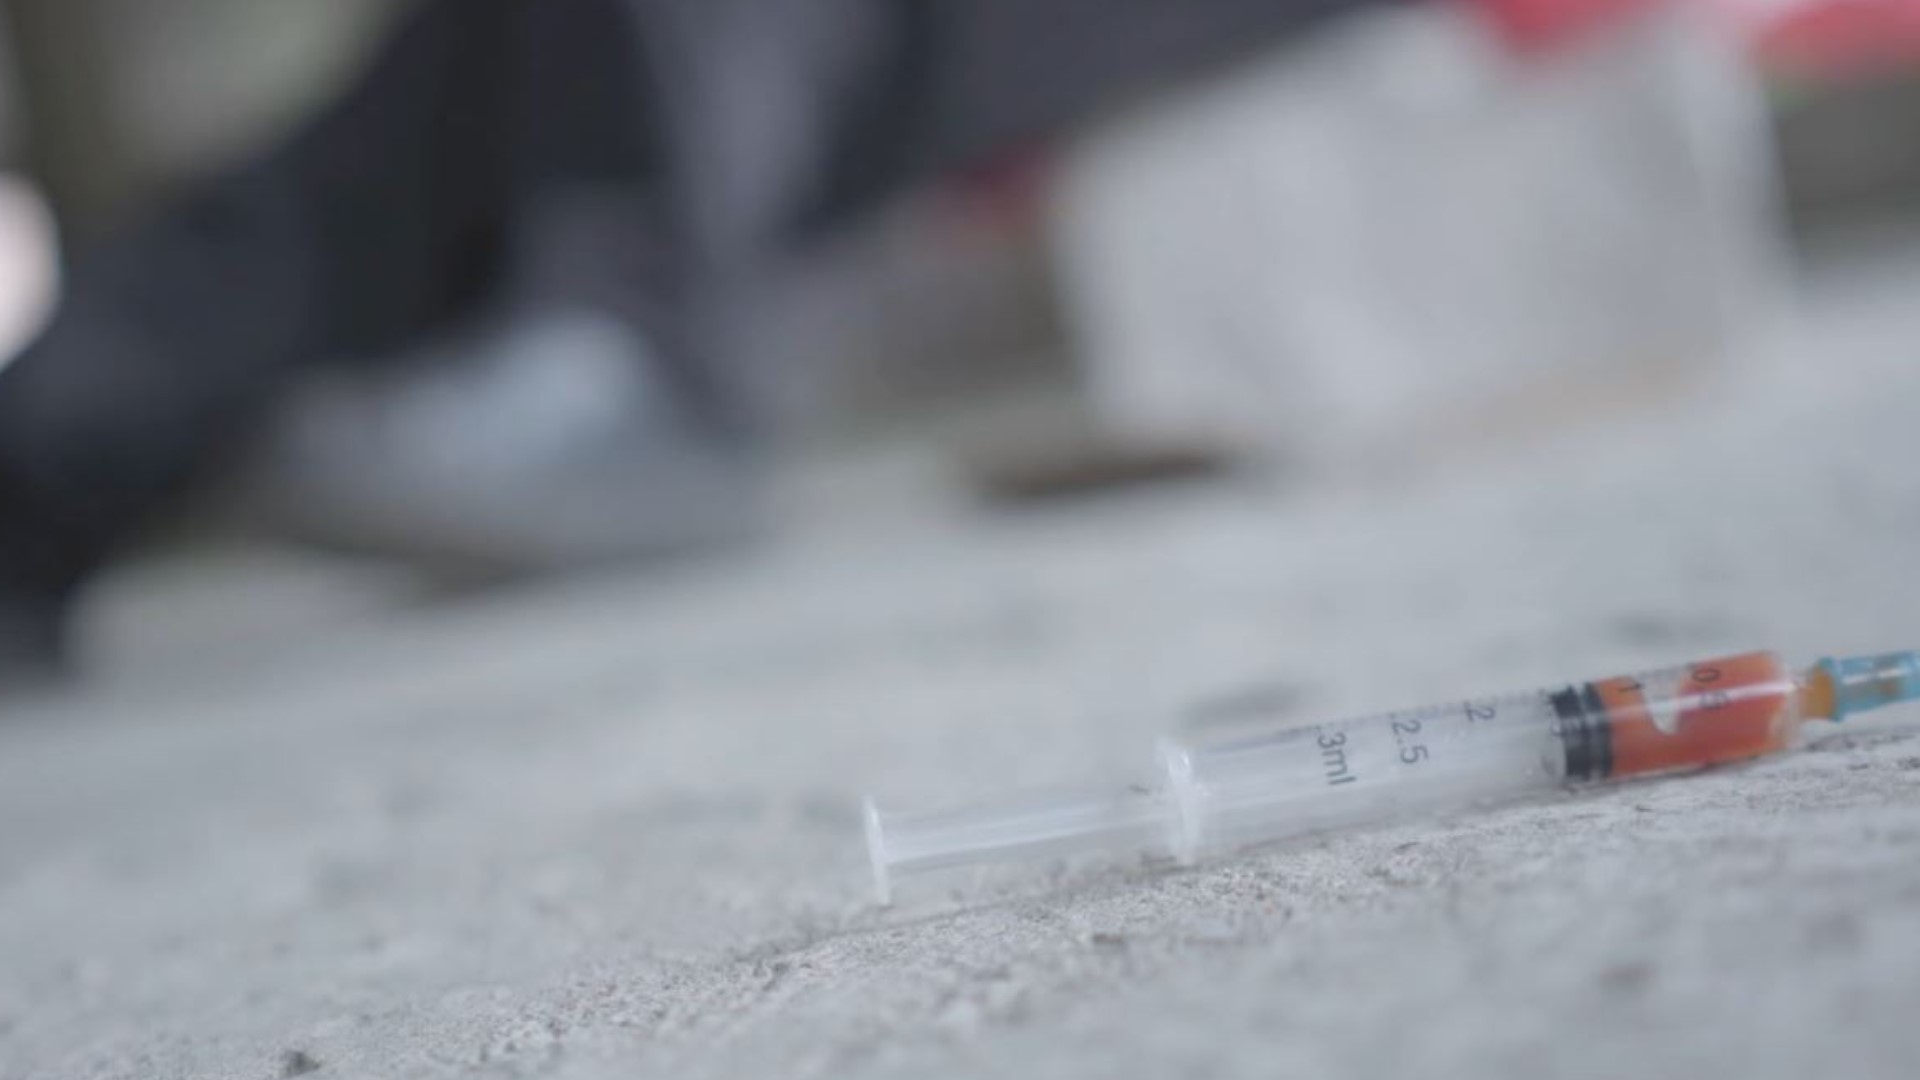 Newswatch 16 spoke with area doctors and healthcare workers about how locals are coping with addiction during the pandemic.